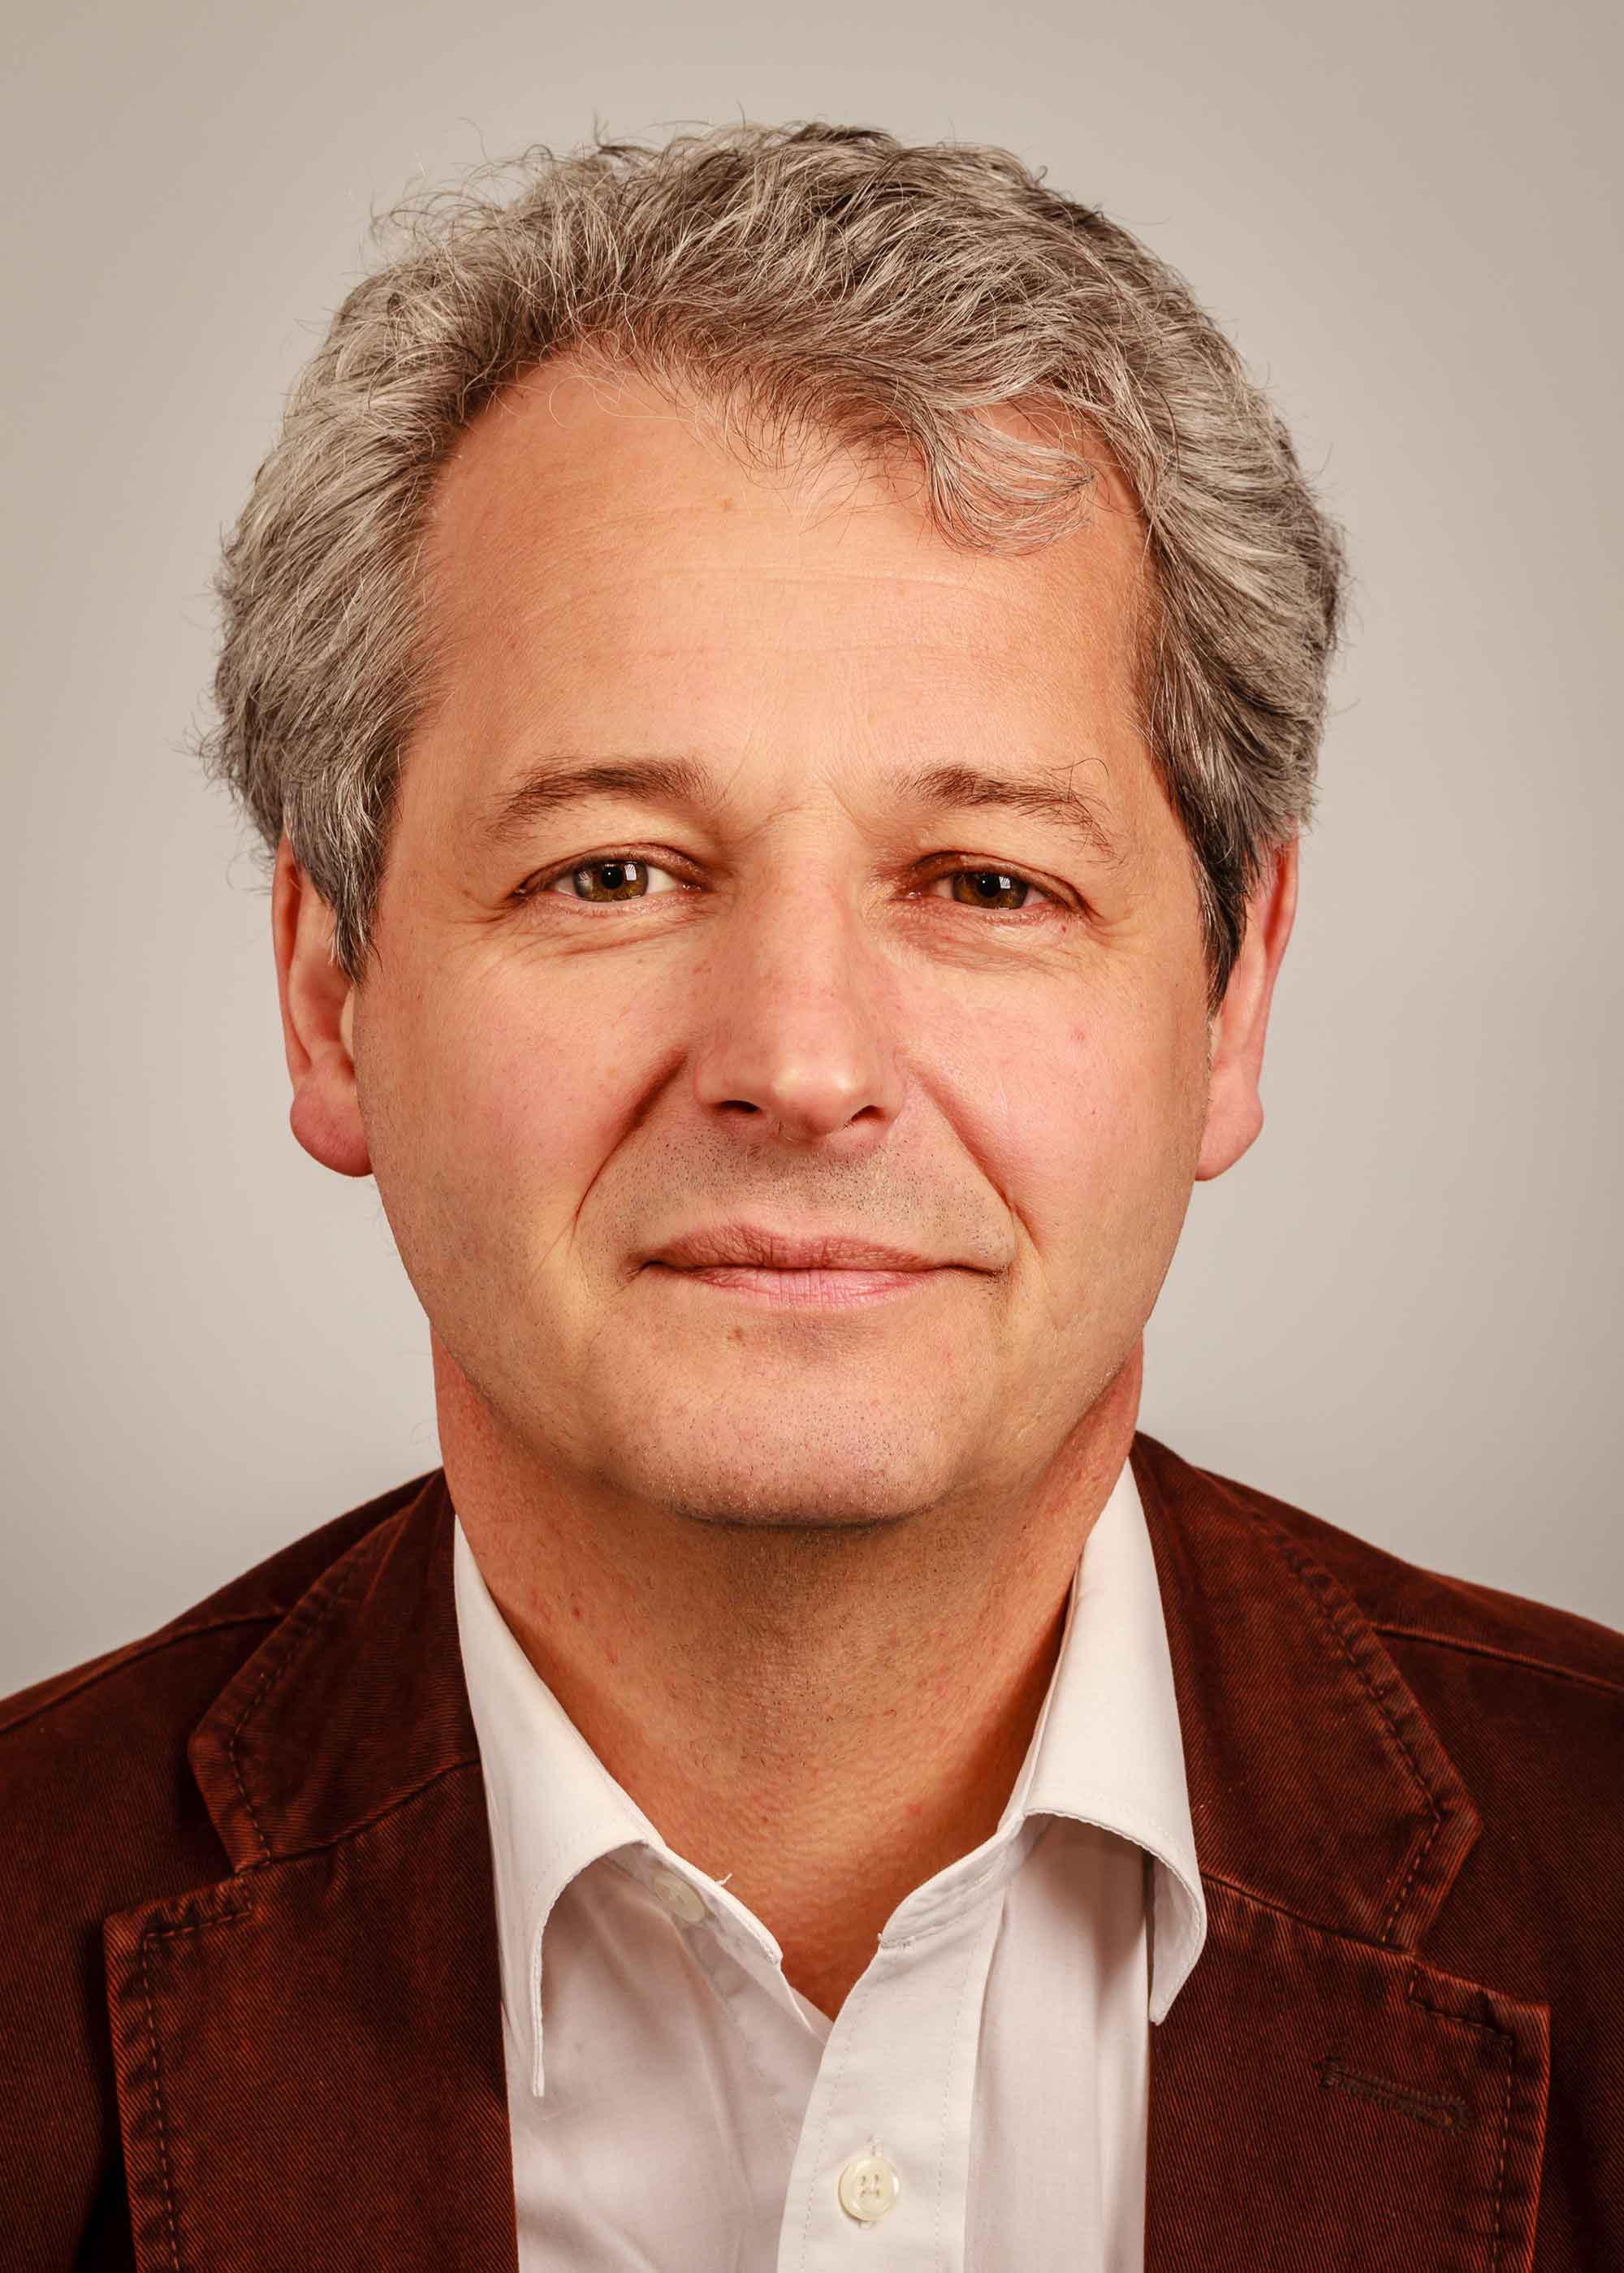 Prof. Dr. Christian Diedrich, Institute for Automation and Communication at Otto-von-Guericke University Magdeburg